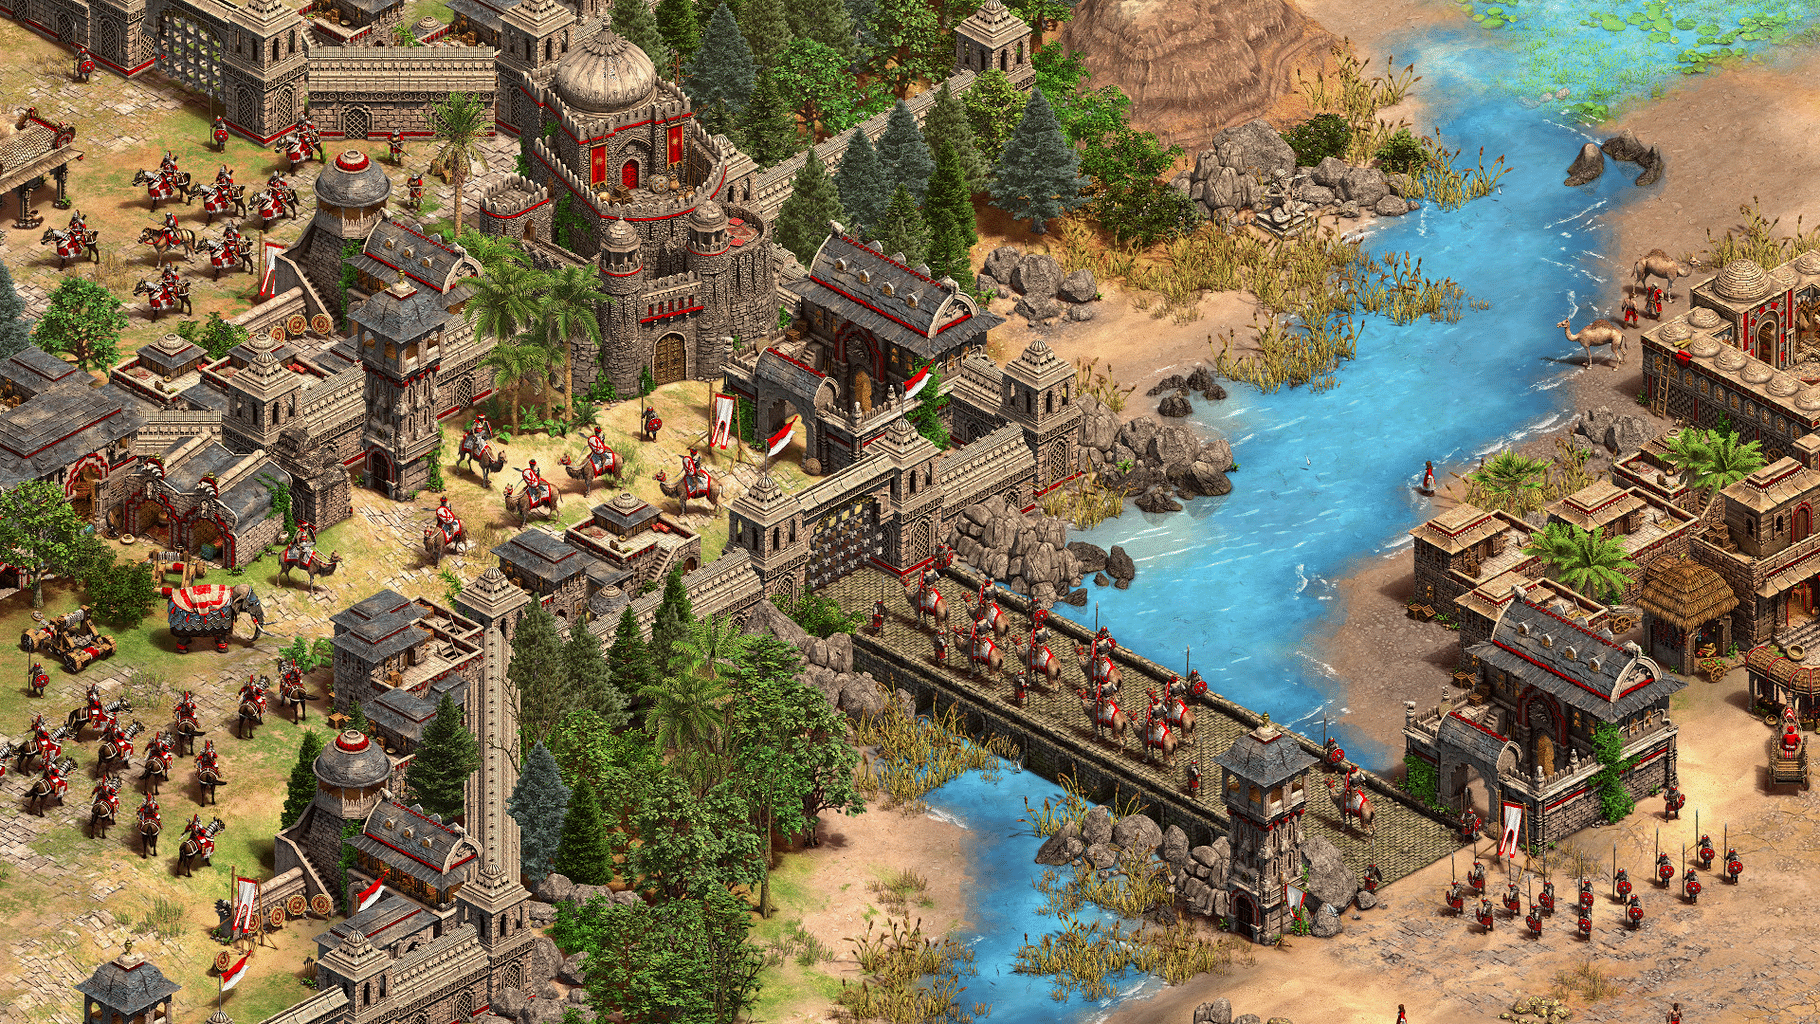 Age of Empires II: Definitive Edition - Dynasties of India screenshot